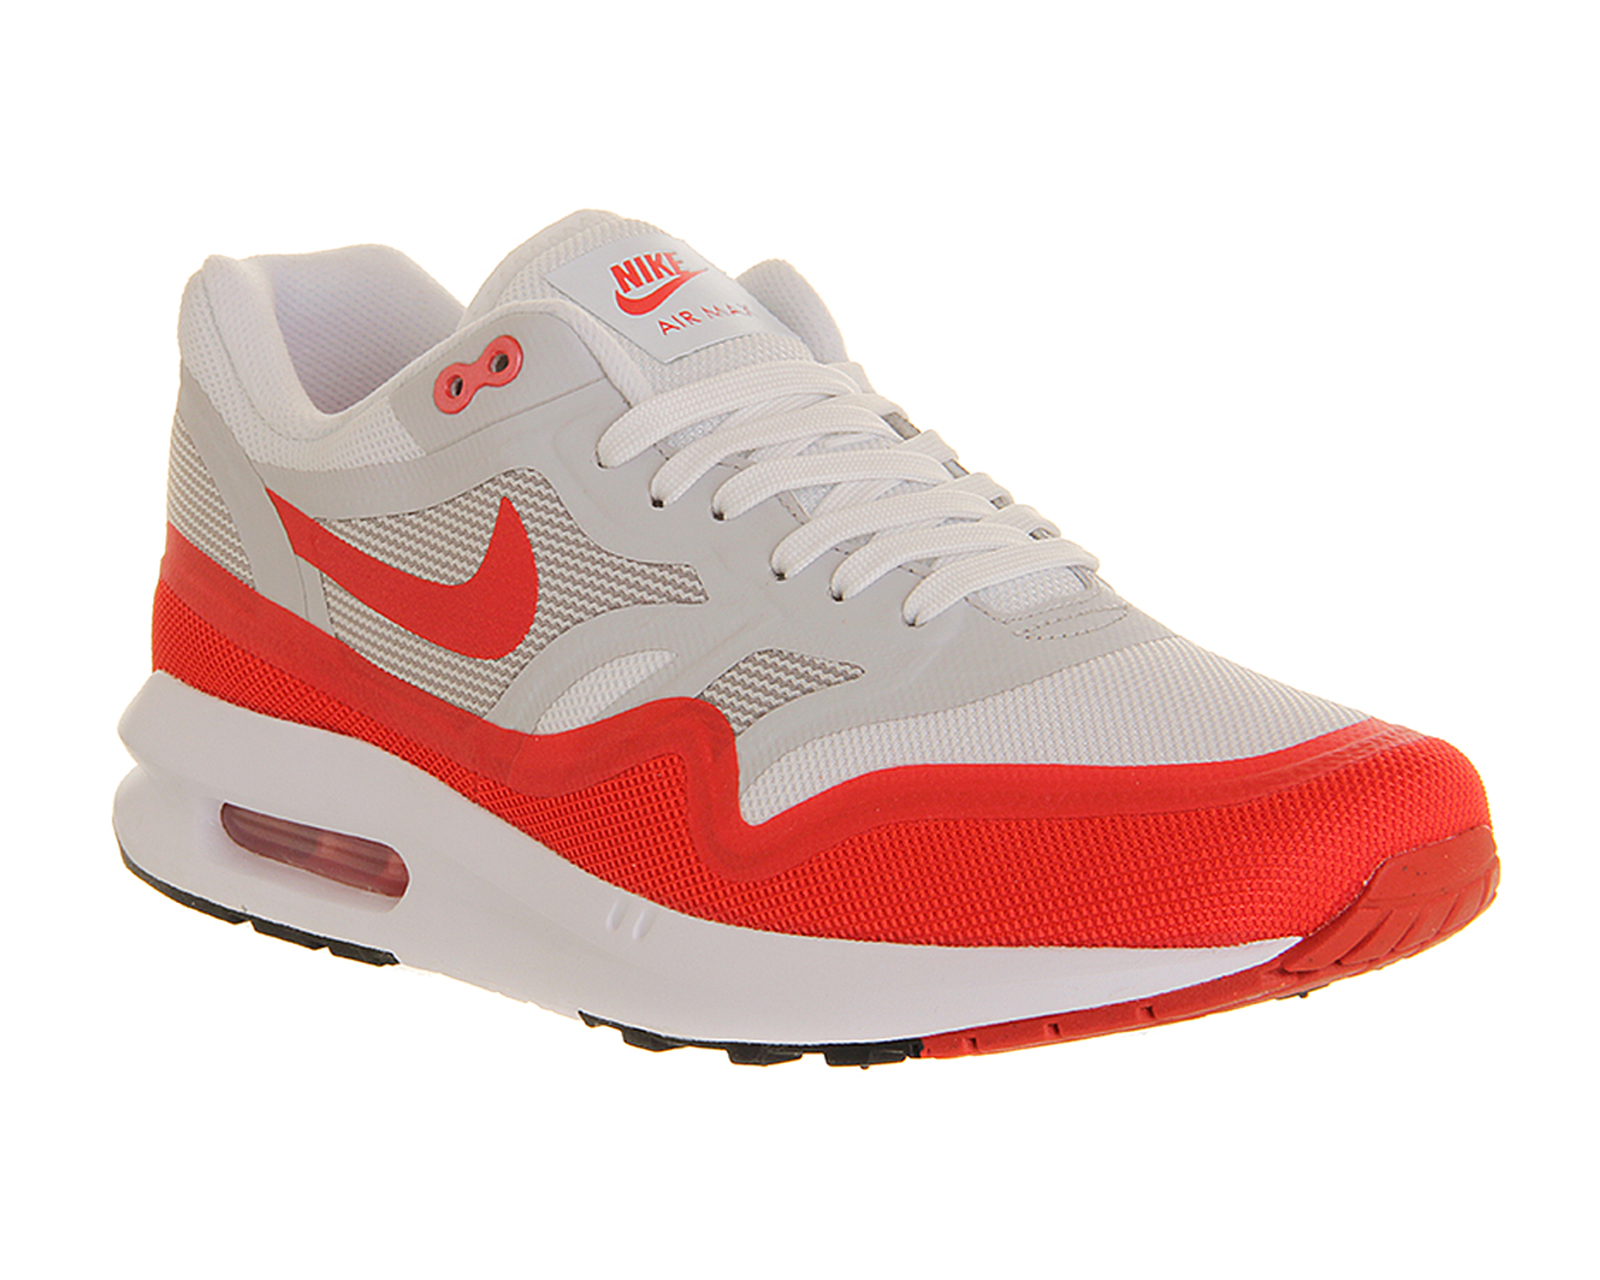 NikeAir Max Lunar 1 (m)White Chilling Red